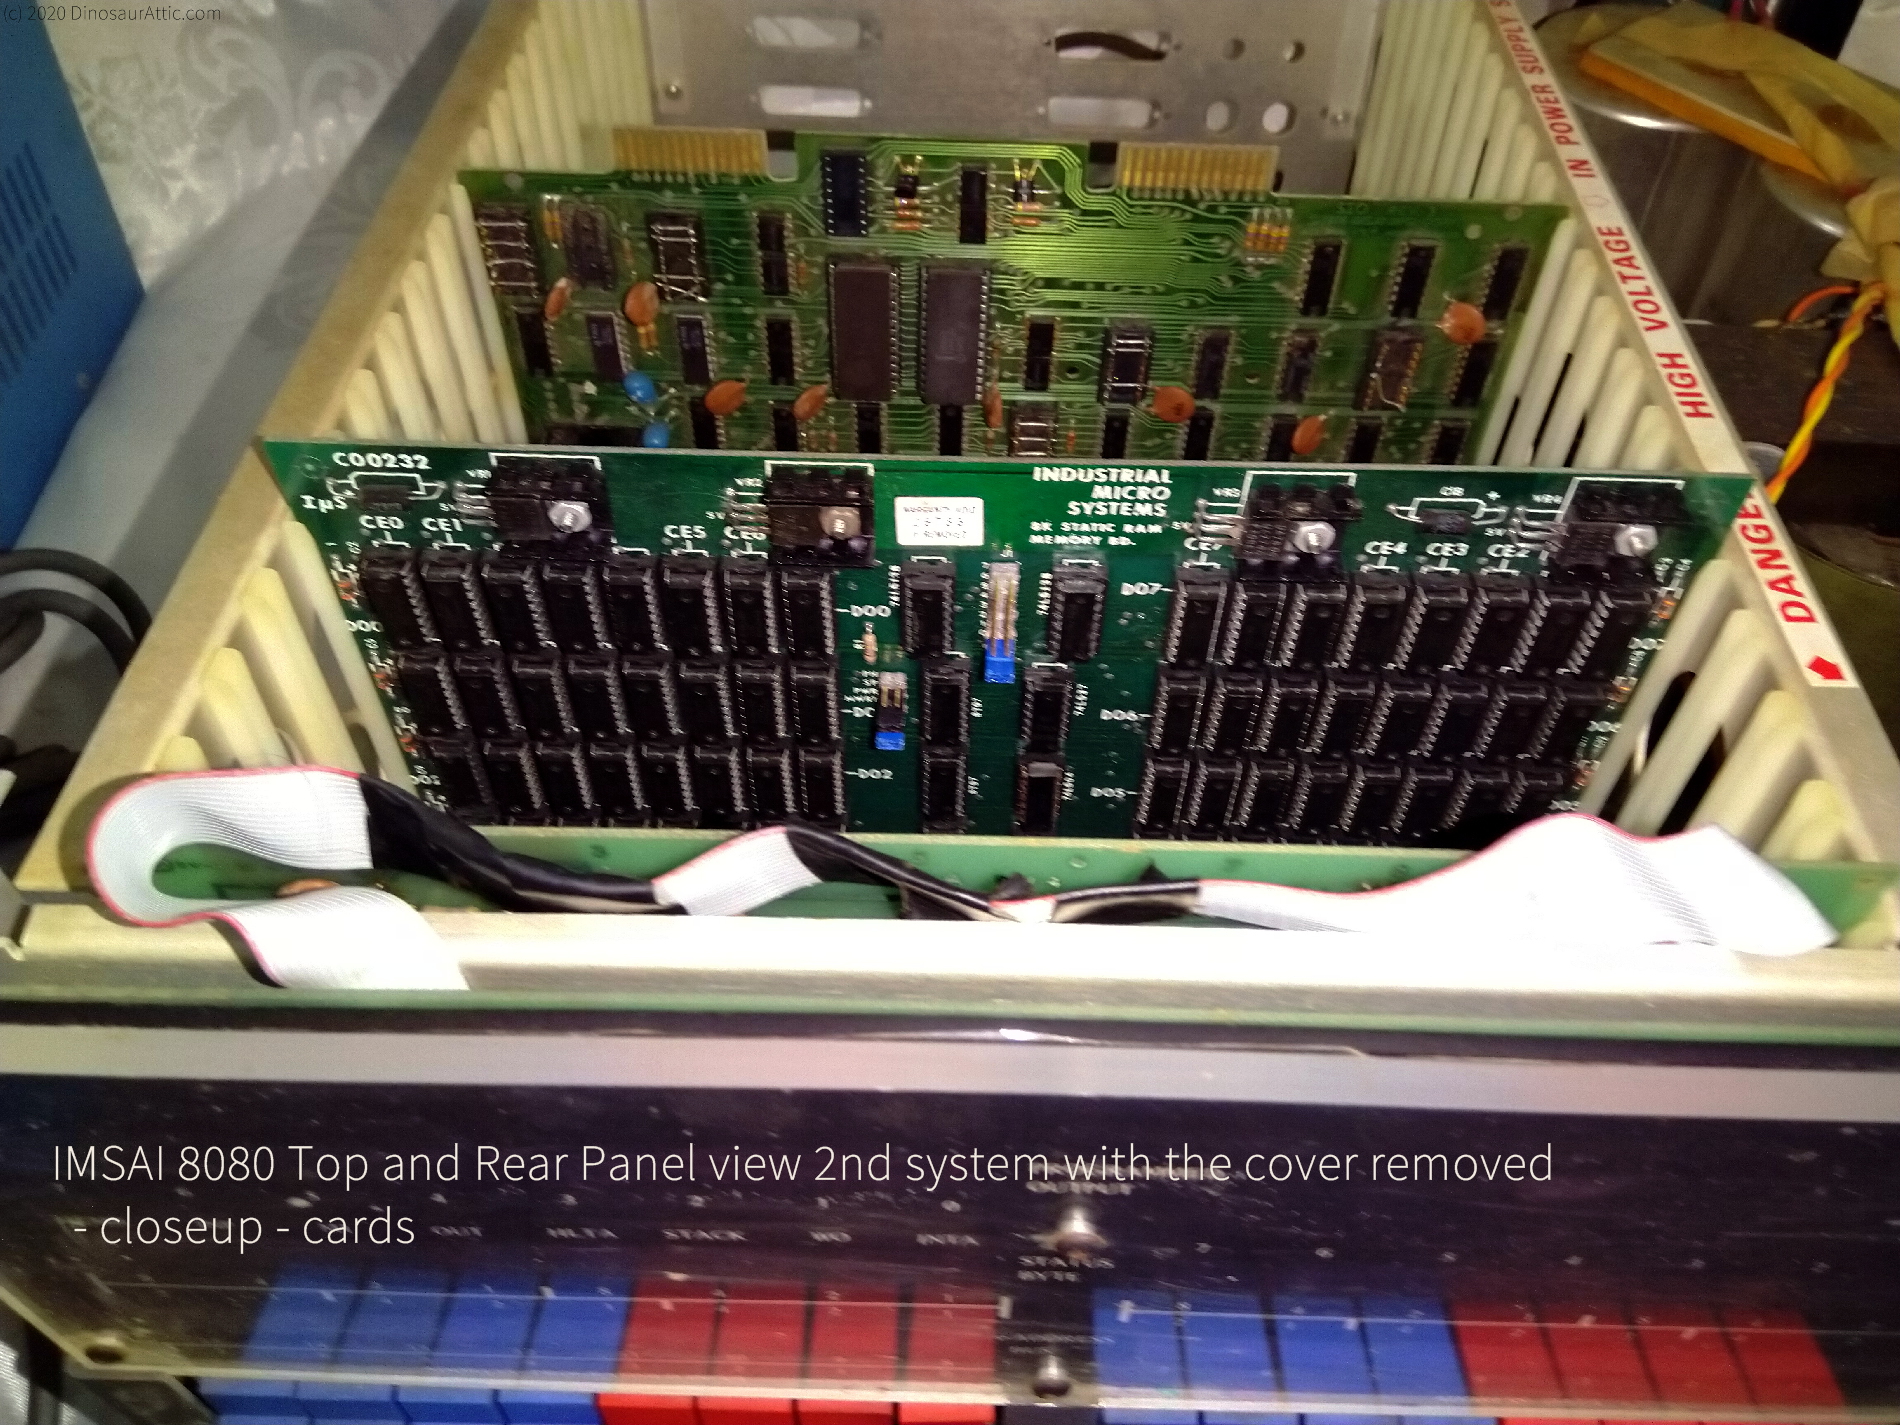 <b>IMSAI 8080 Top and Rear Panel view 2nd system with the cover removed - closeup - cards</b>